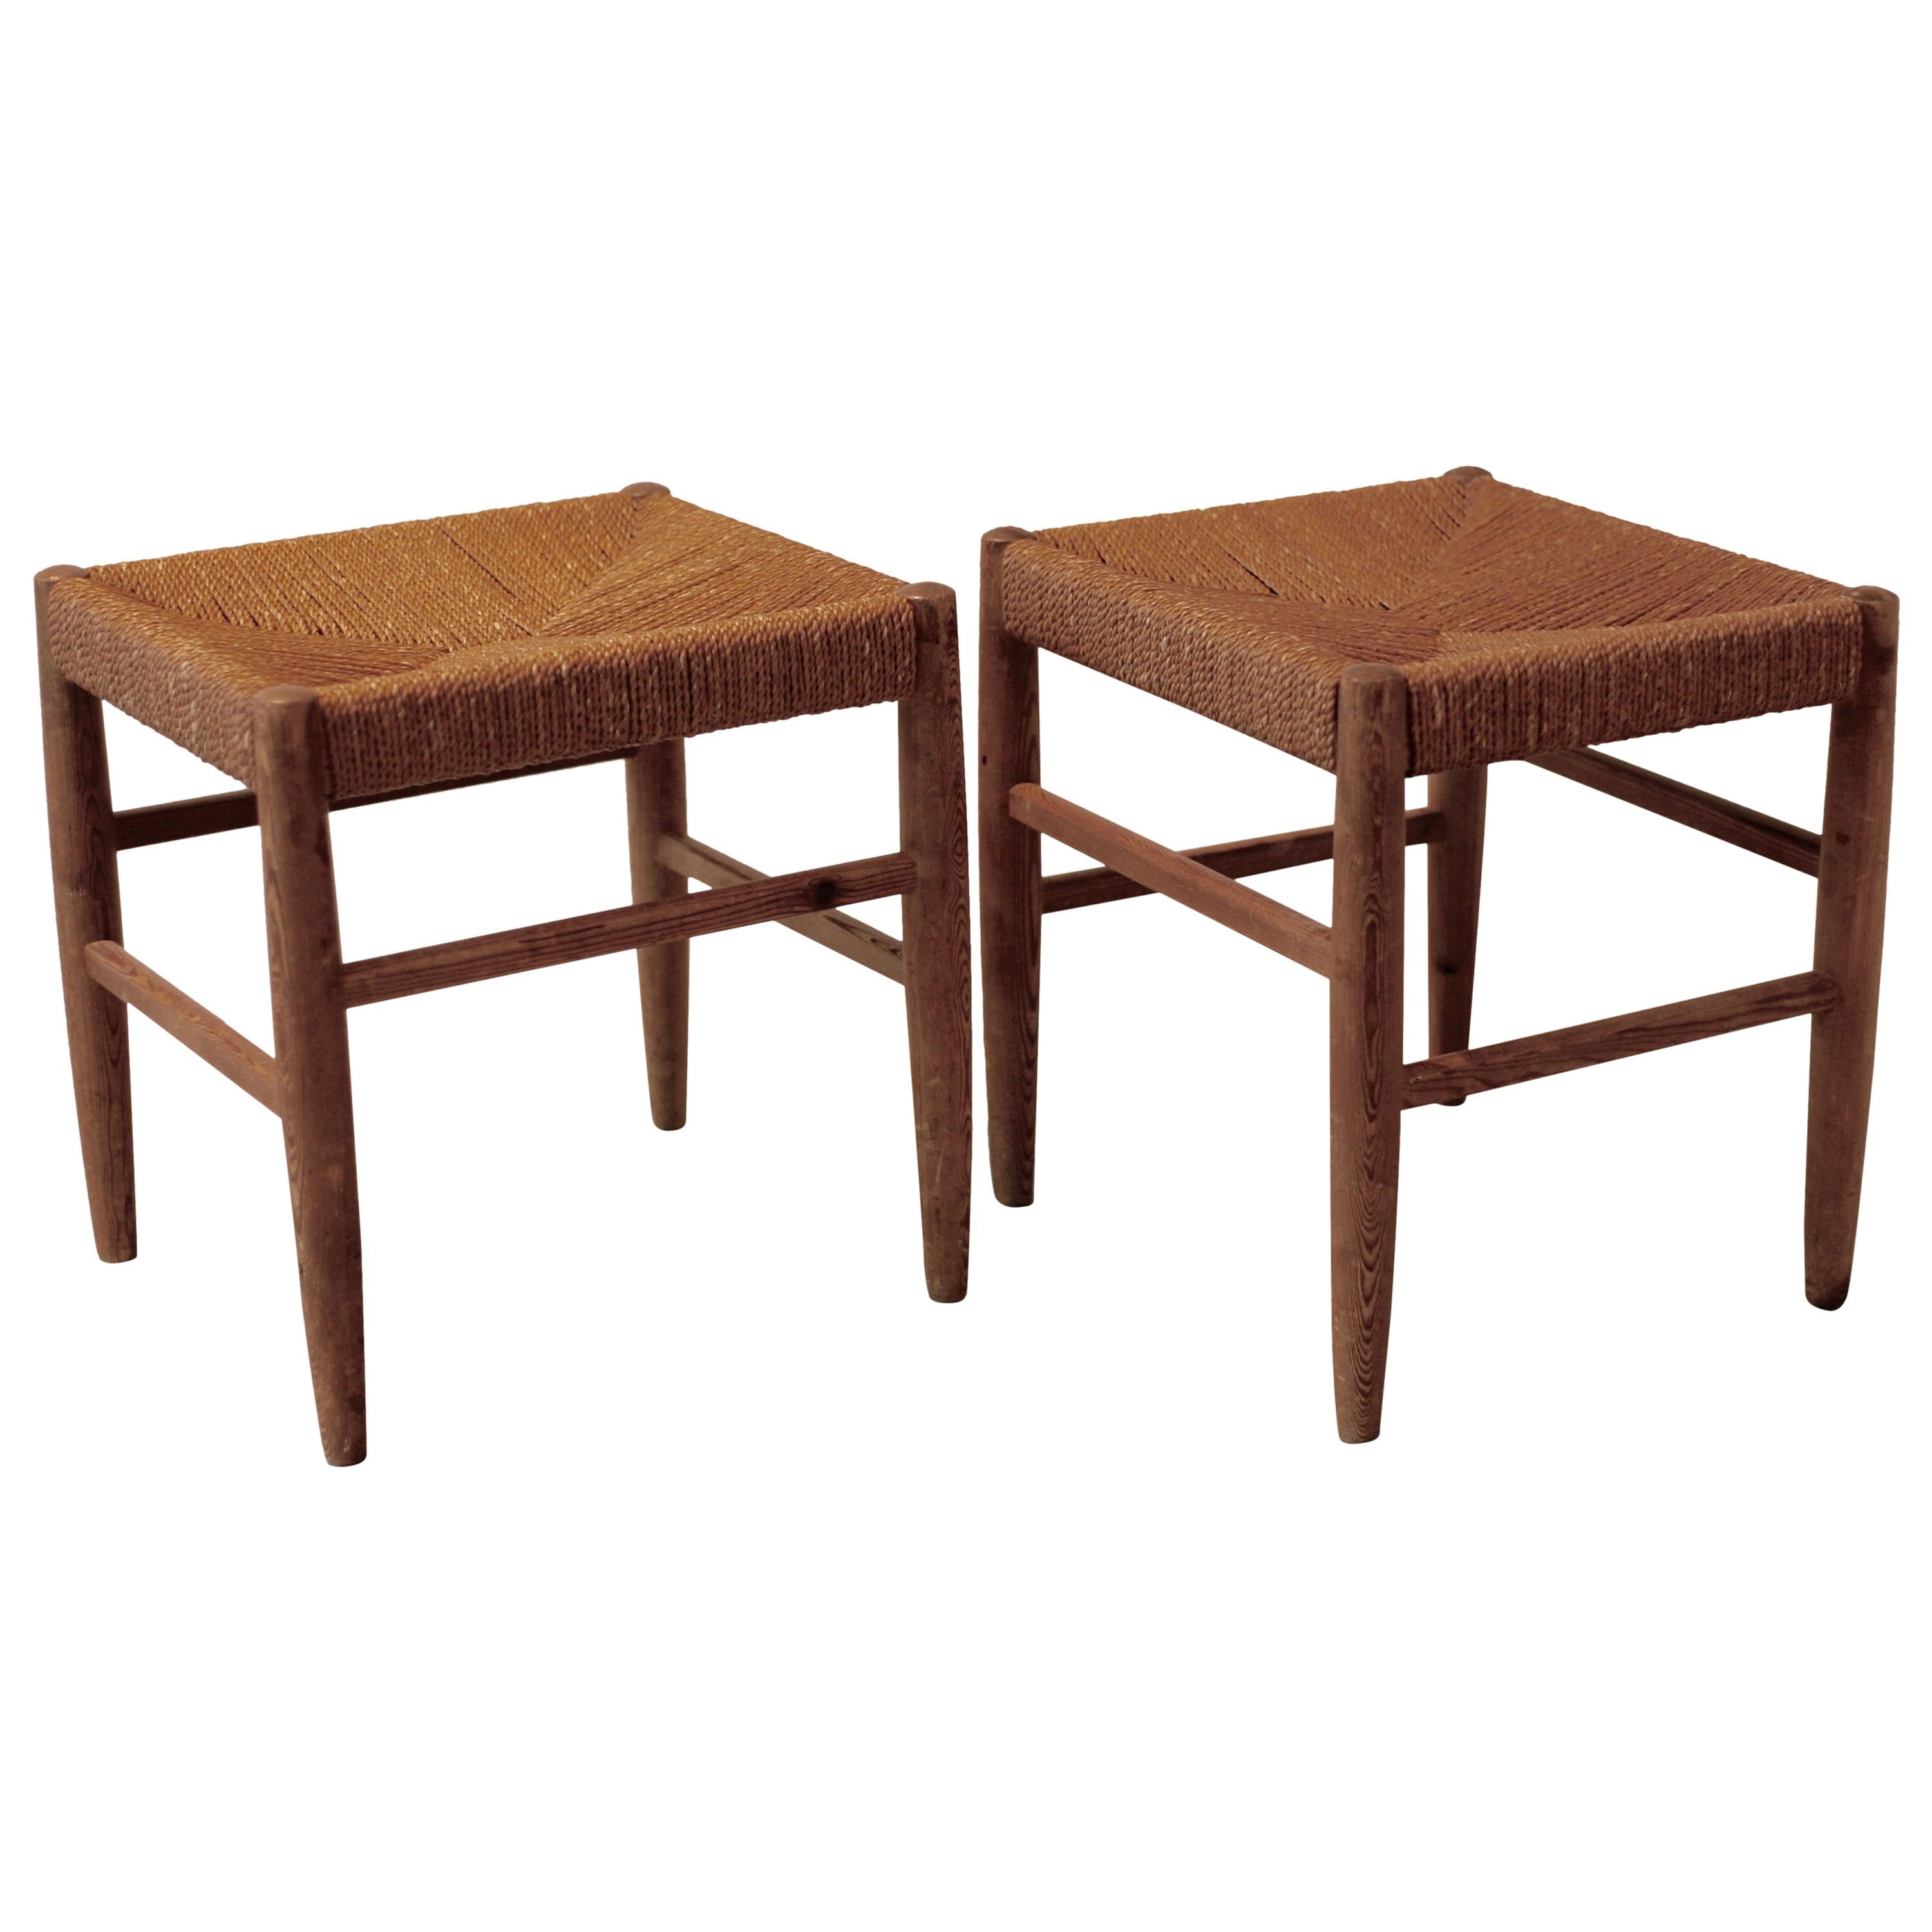 Pair of Swedish Pine Stools with Rush Seats of Spun Papercord, Midcentury For Sale